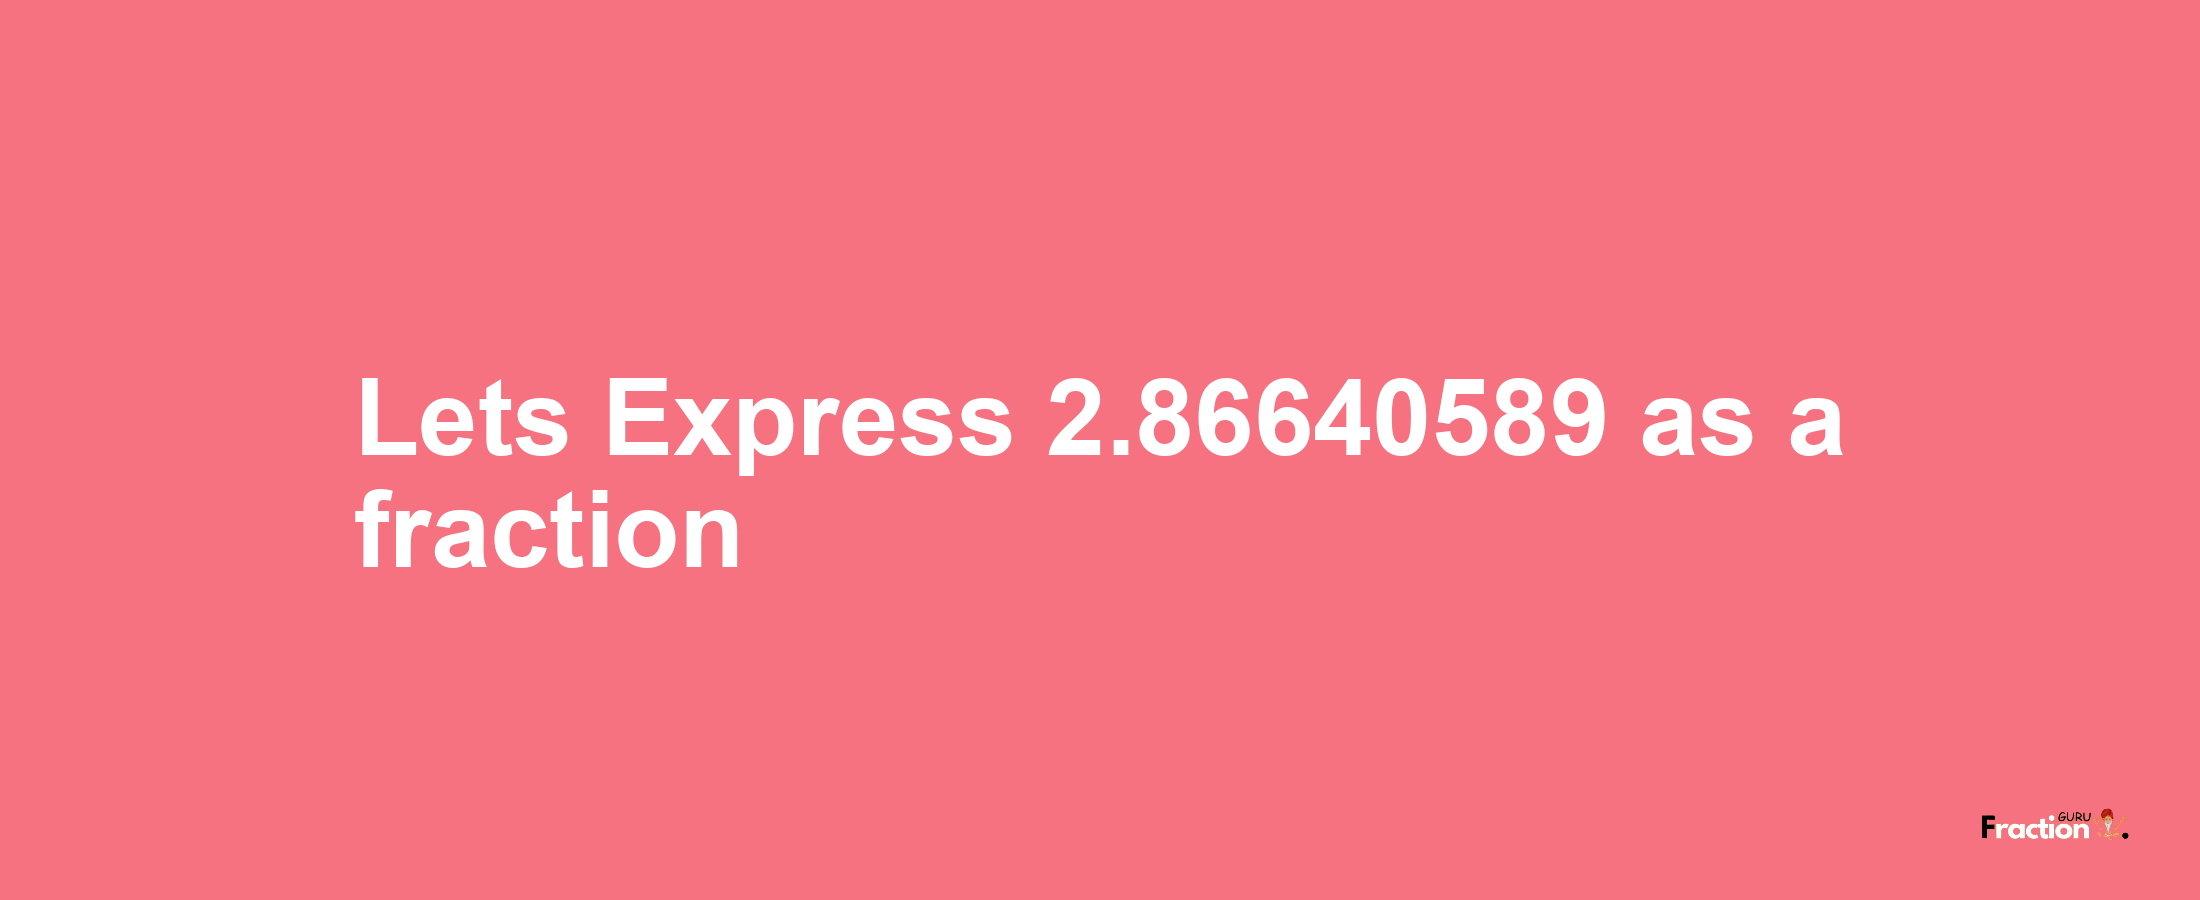 Lets Express 2.86640589 as afraction